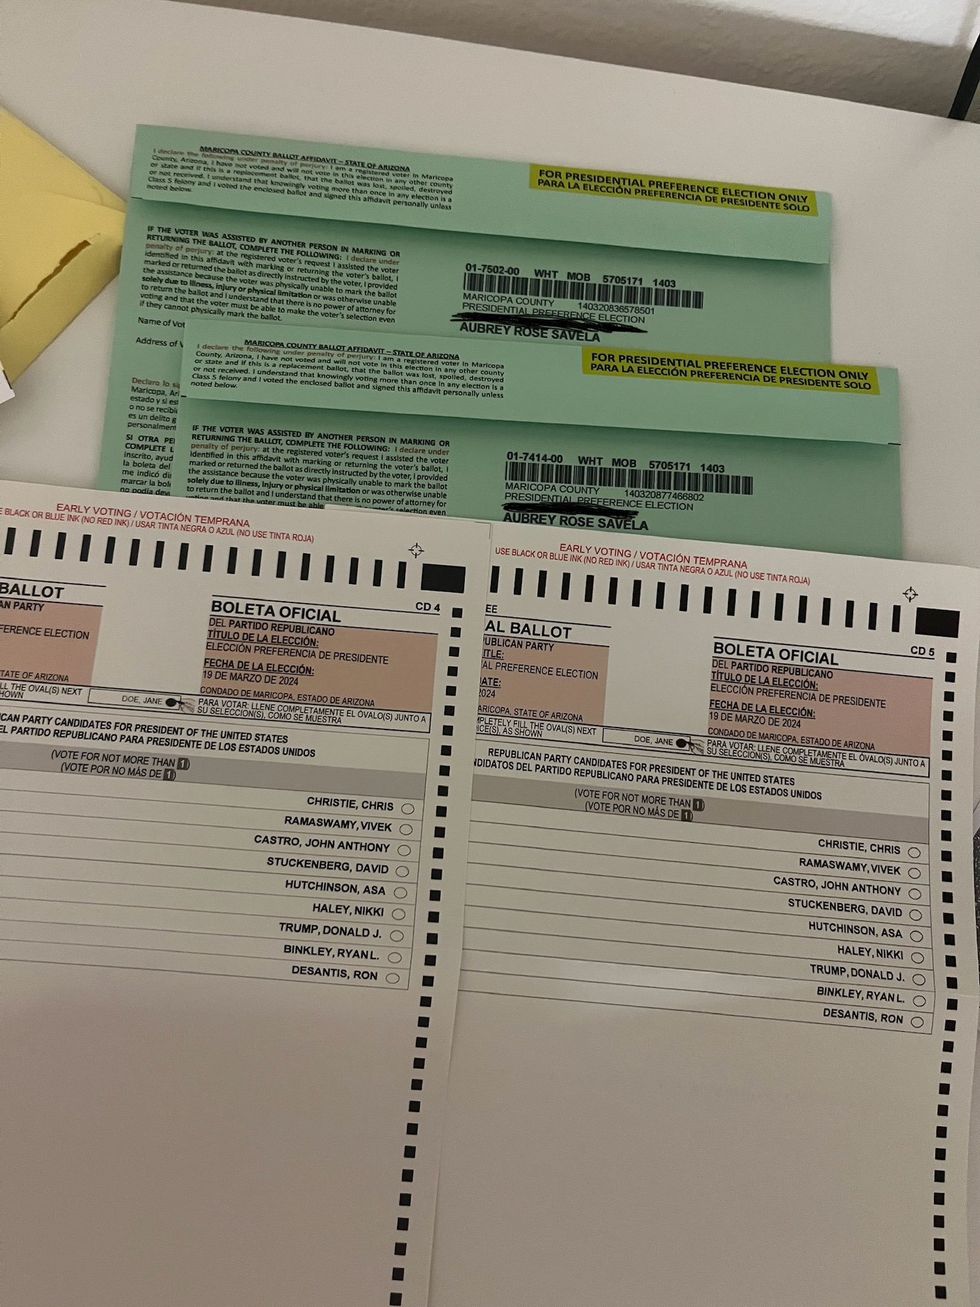 Aubrey Savela's two mail-in ballots